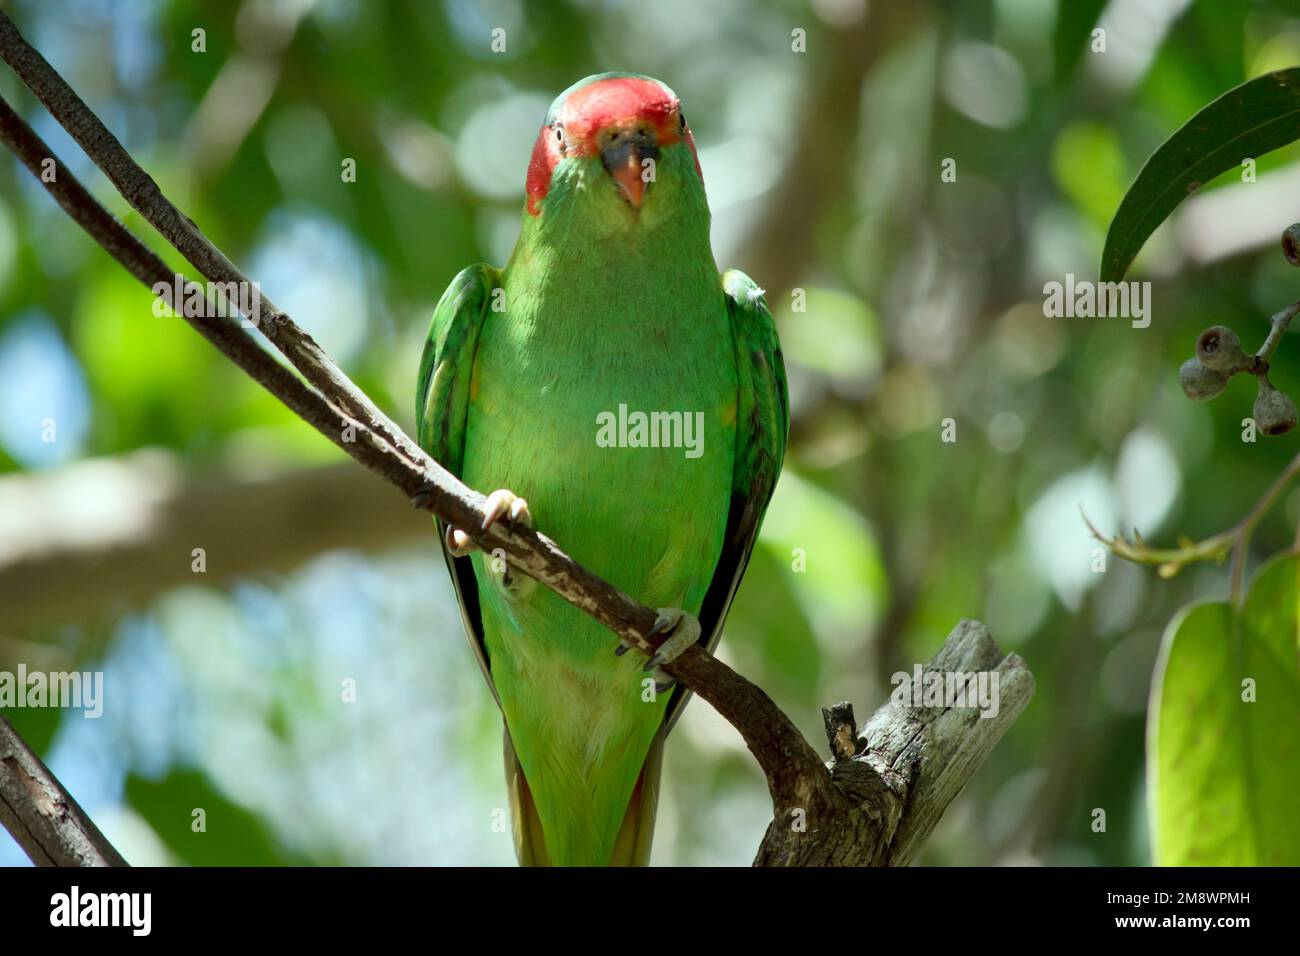 the musk lorikeet is a green bird with red over the beak with red on its cheeks Stock Photo